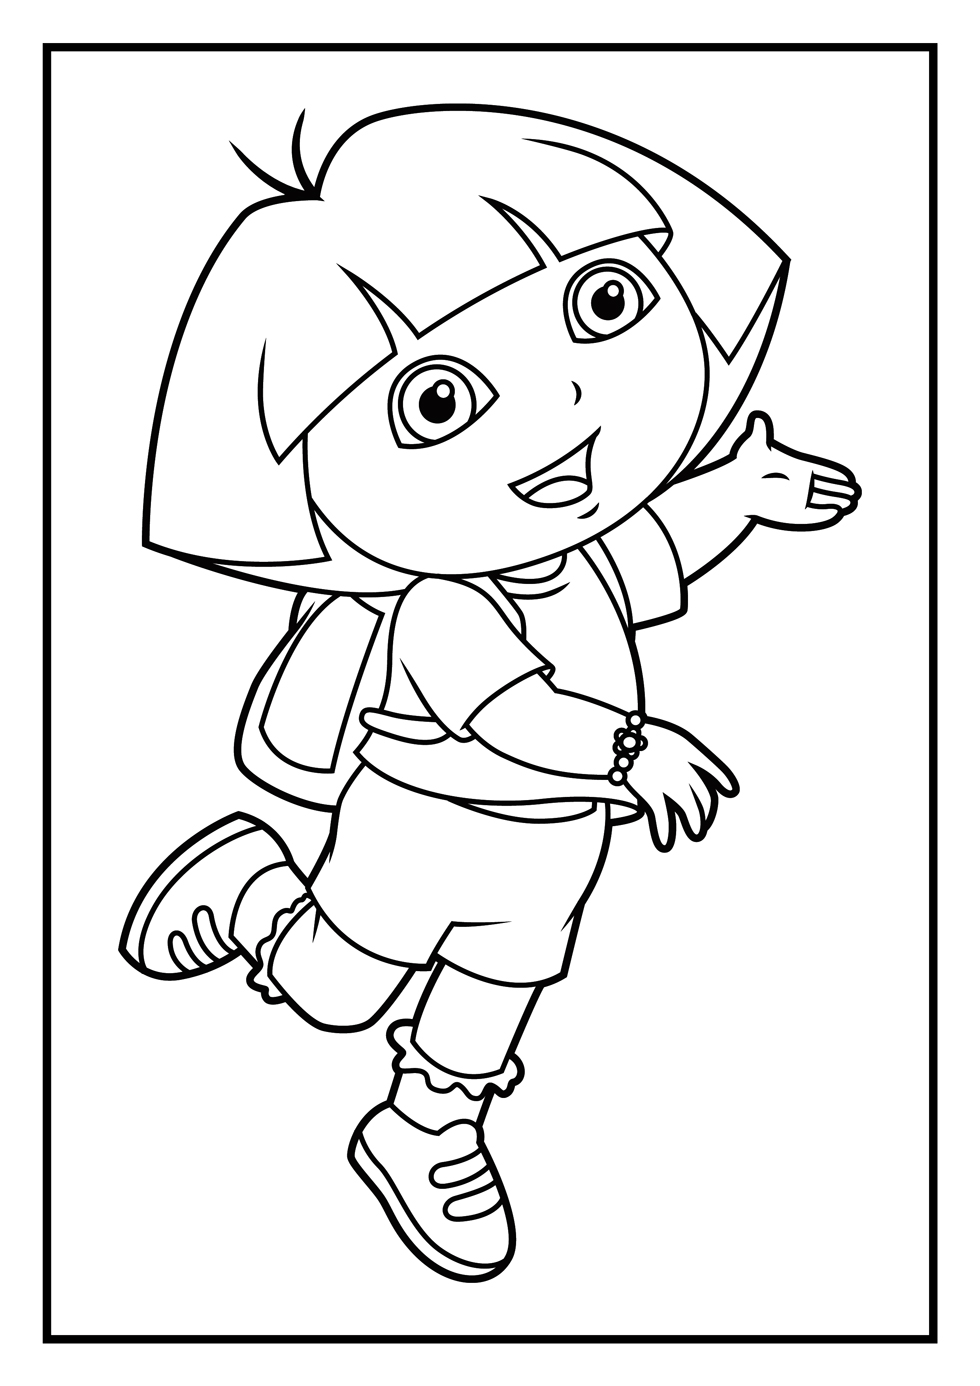 Dora Coloring Pages Diego Coloring Pages